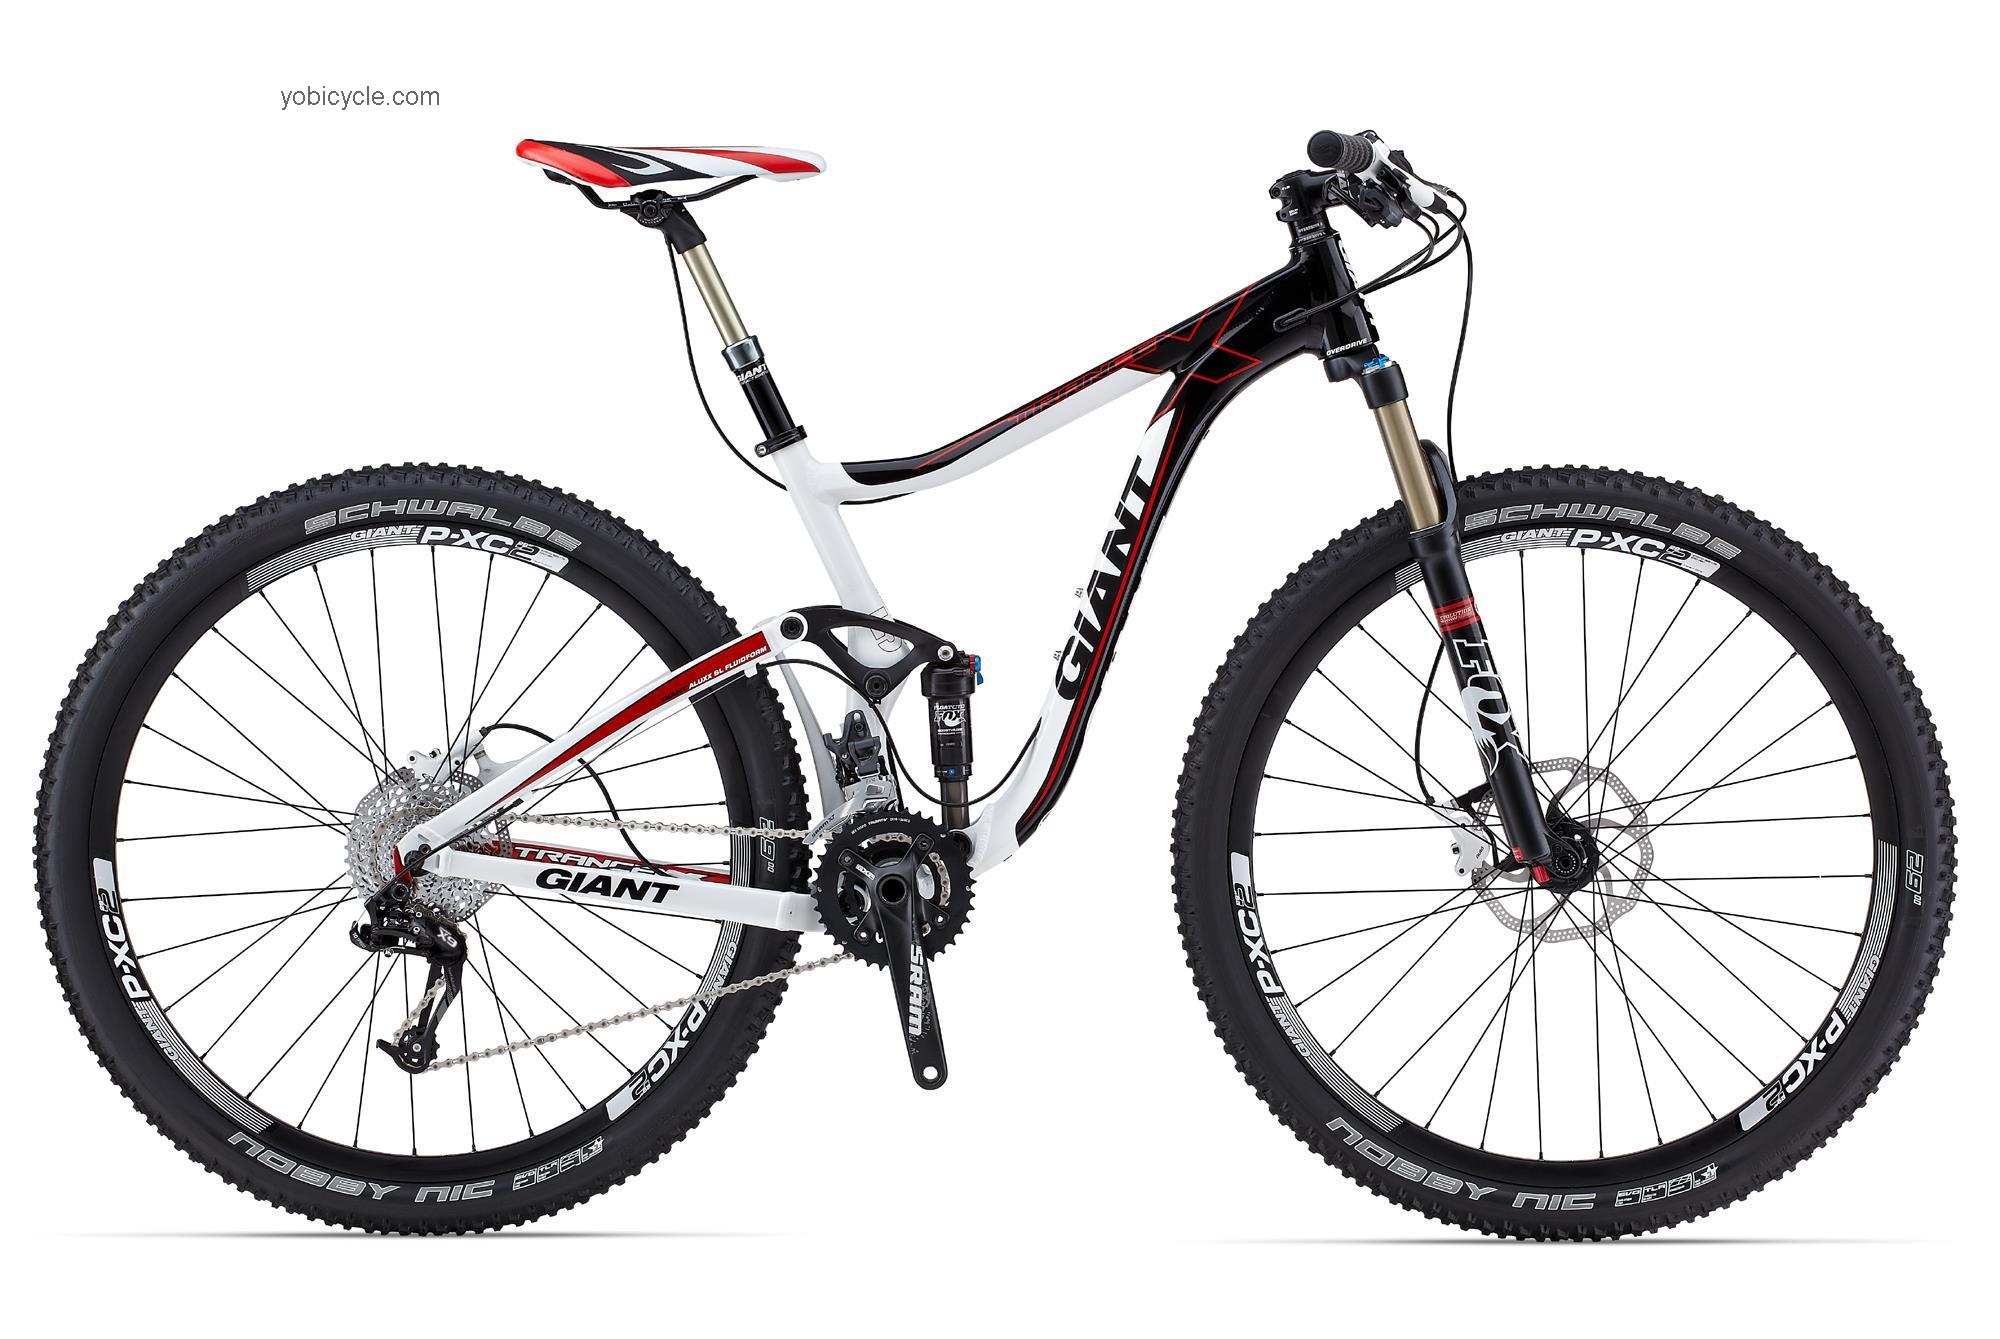 Giant Trance X 29er 1 2013 comparison online with competitors